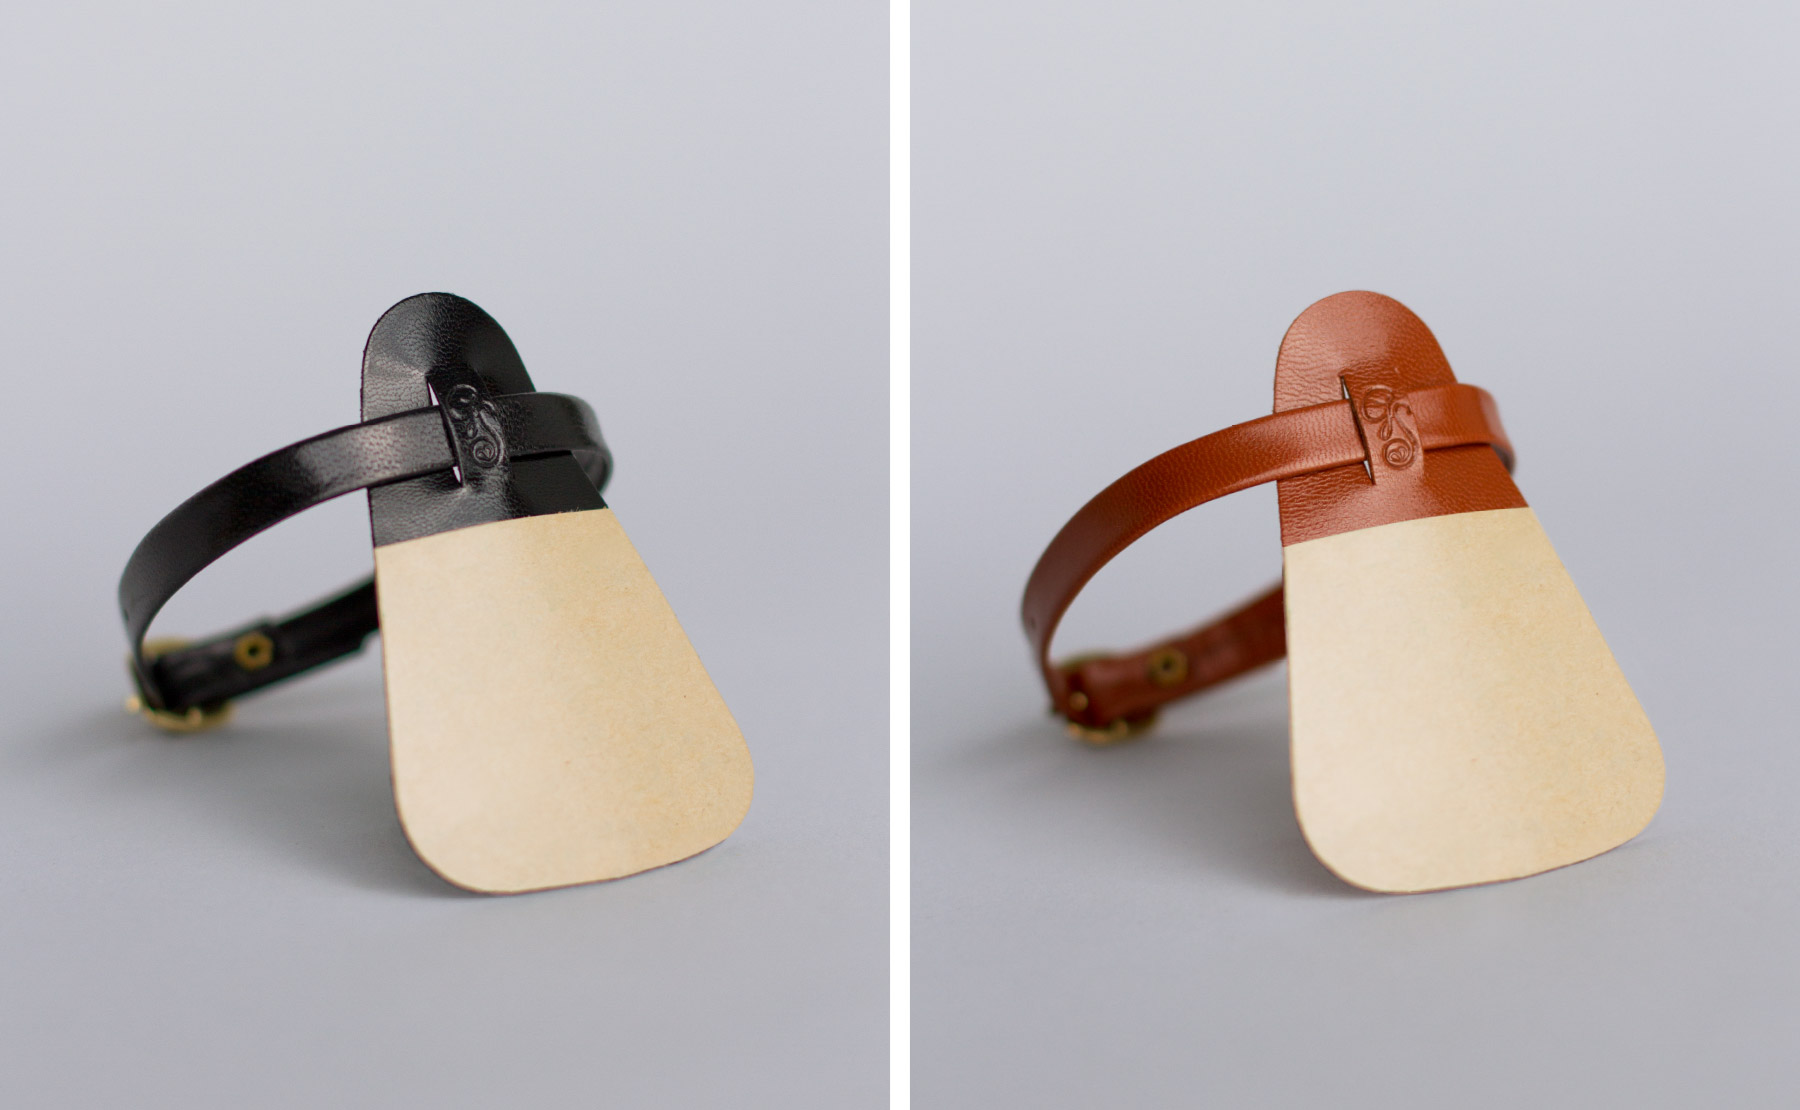 Fuze-Branding-Small-Business-Product-Photography-Ginger-Straps-Black-Brown-Patented-Add-On-Ankle-Strap-For-Shoes